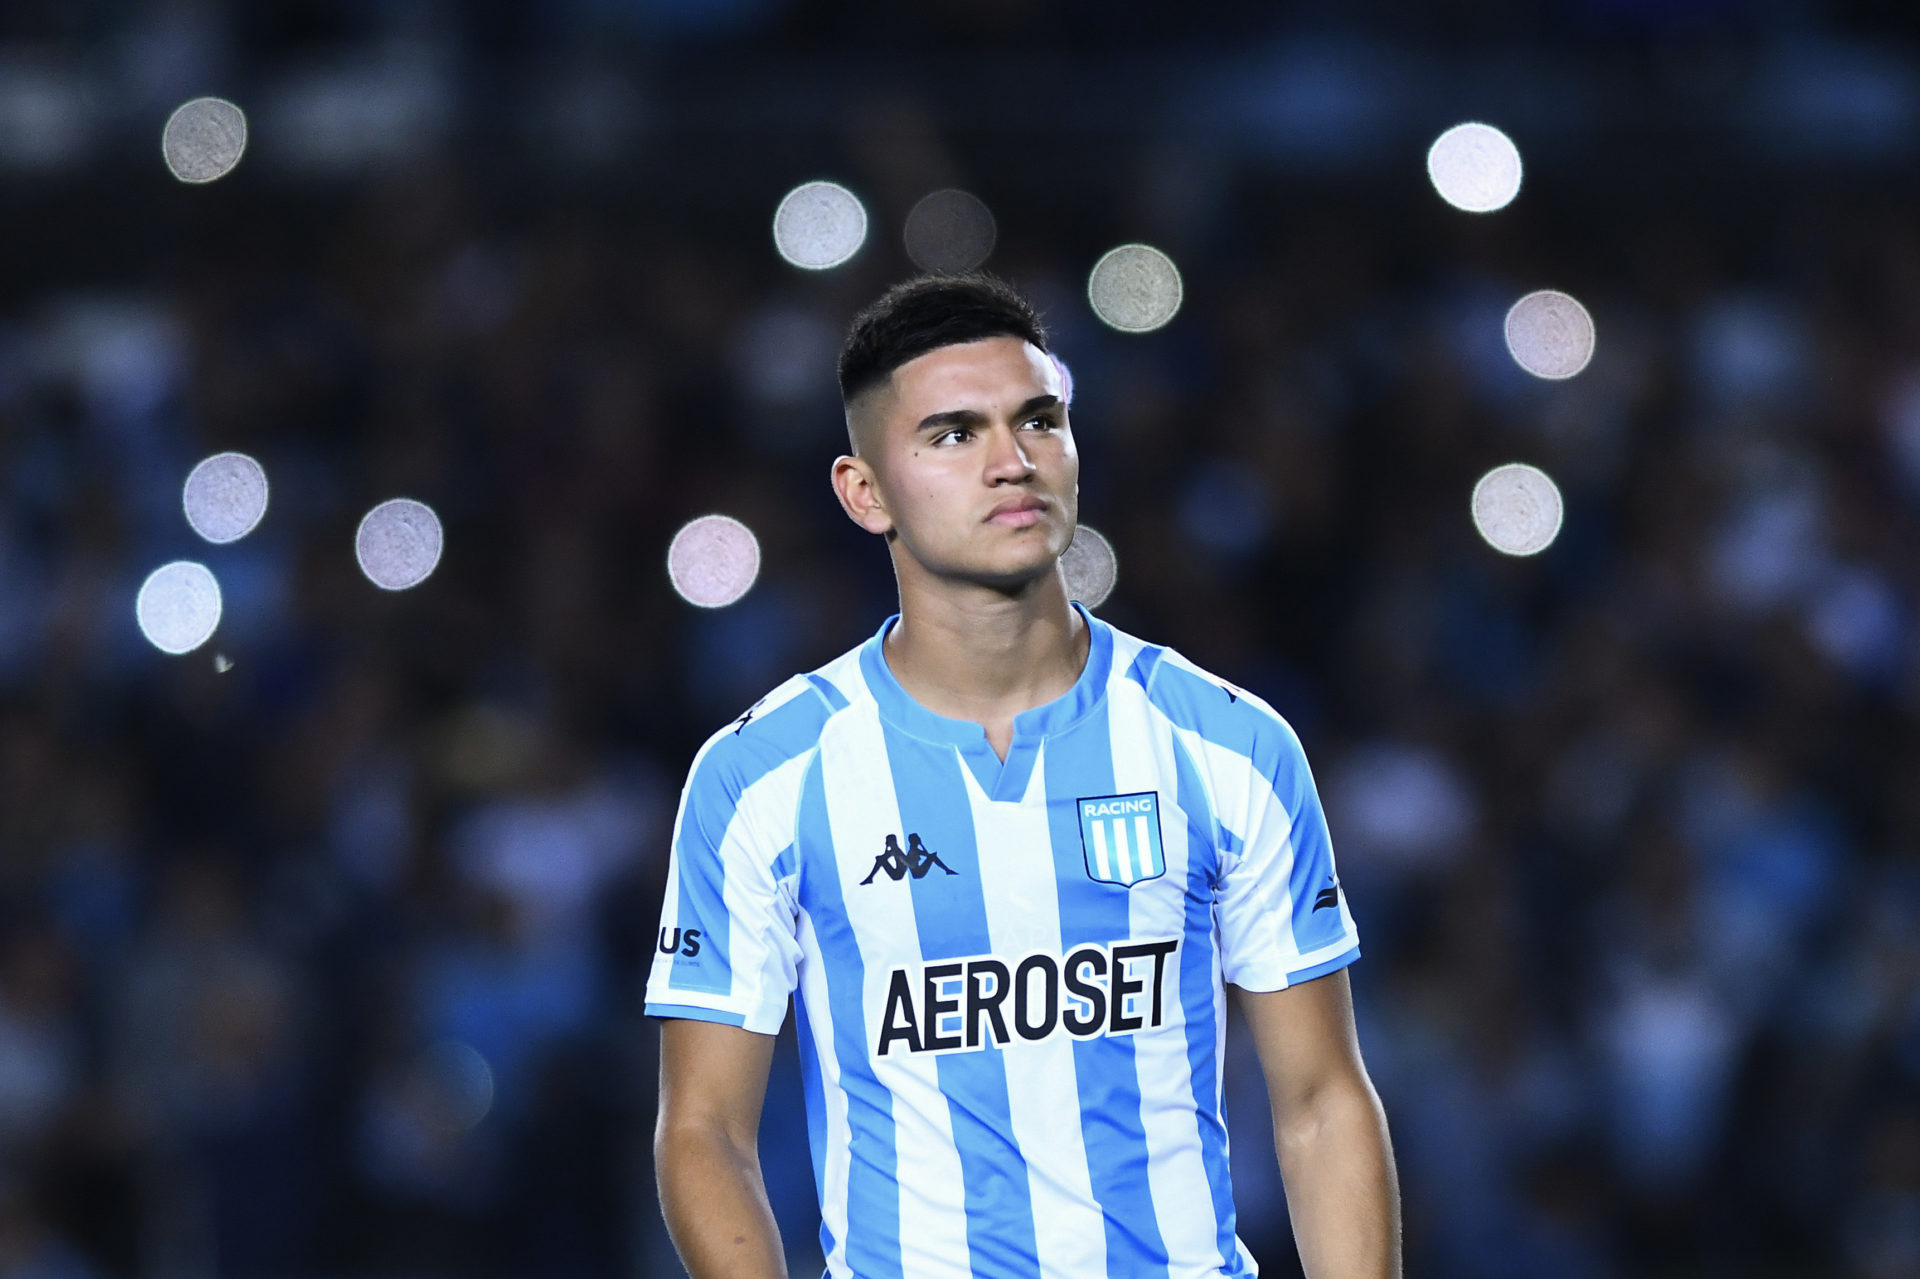 Inter and Milan have laid their eyes on Carlos Alcaraz, but they need to step up their efforts to sign him in January because he's in high demand.